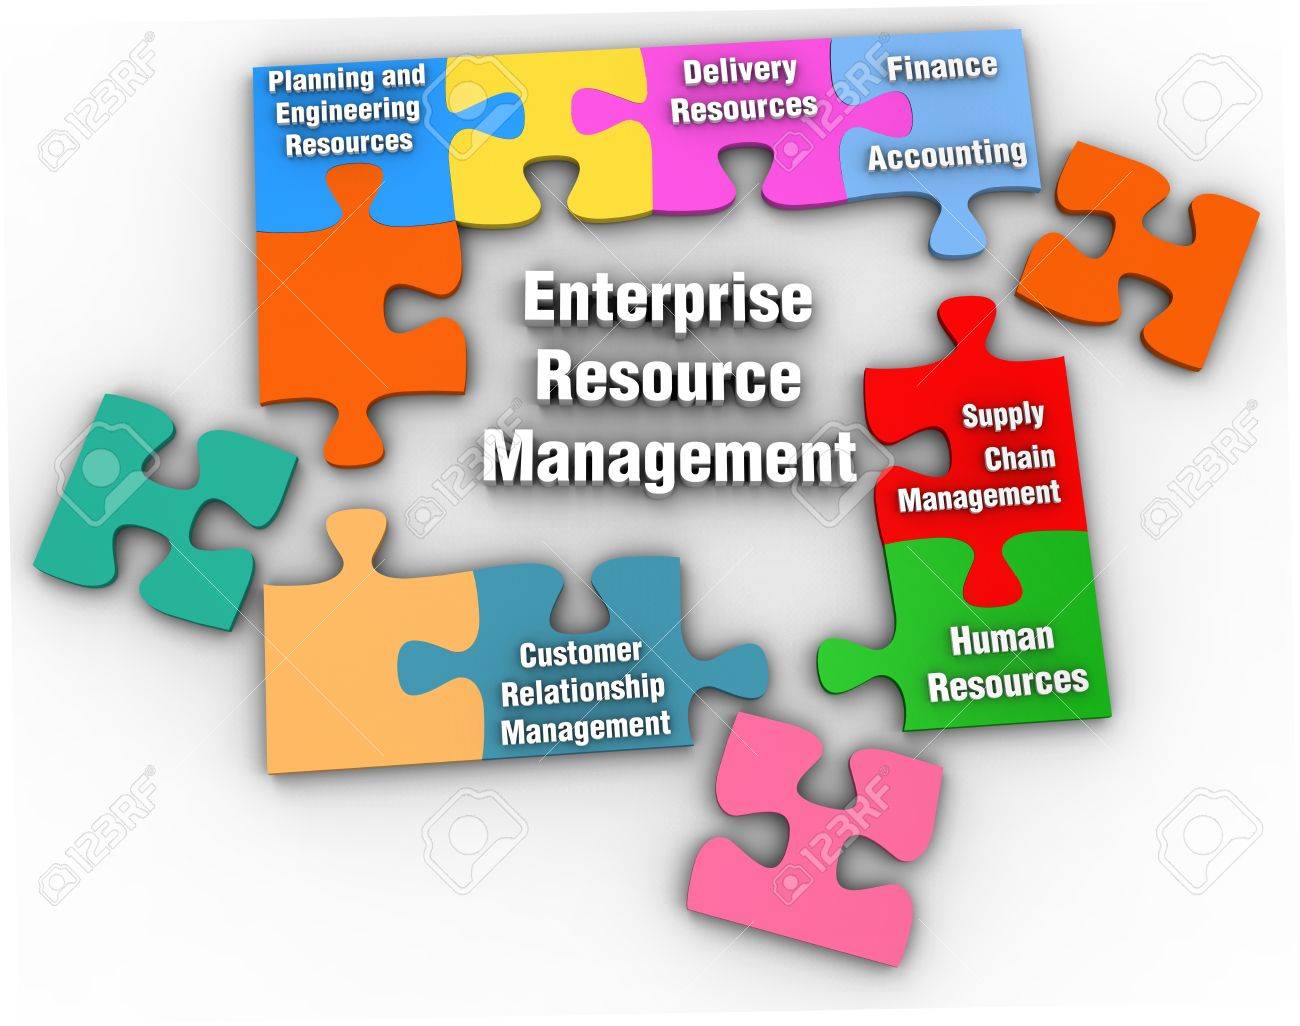 Latest technology in ERP software usage